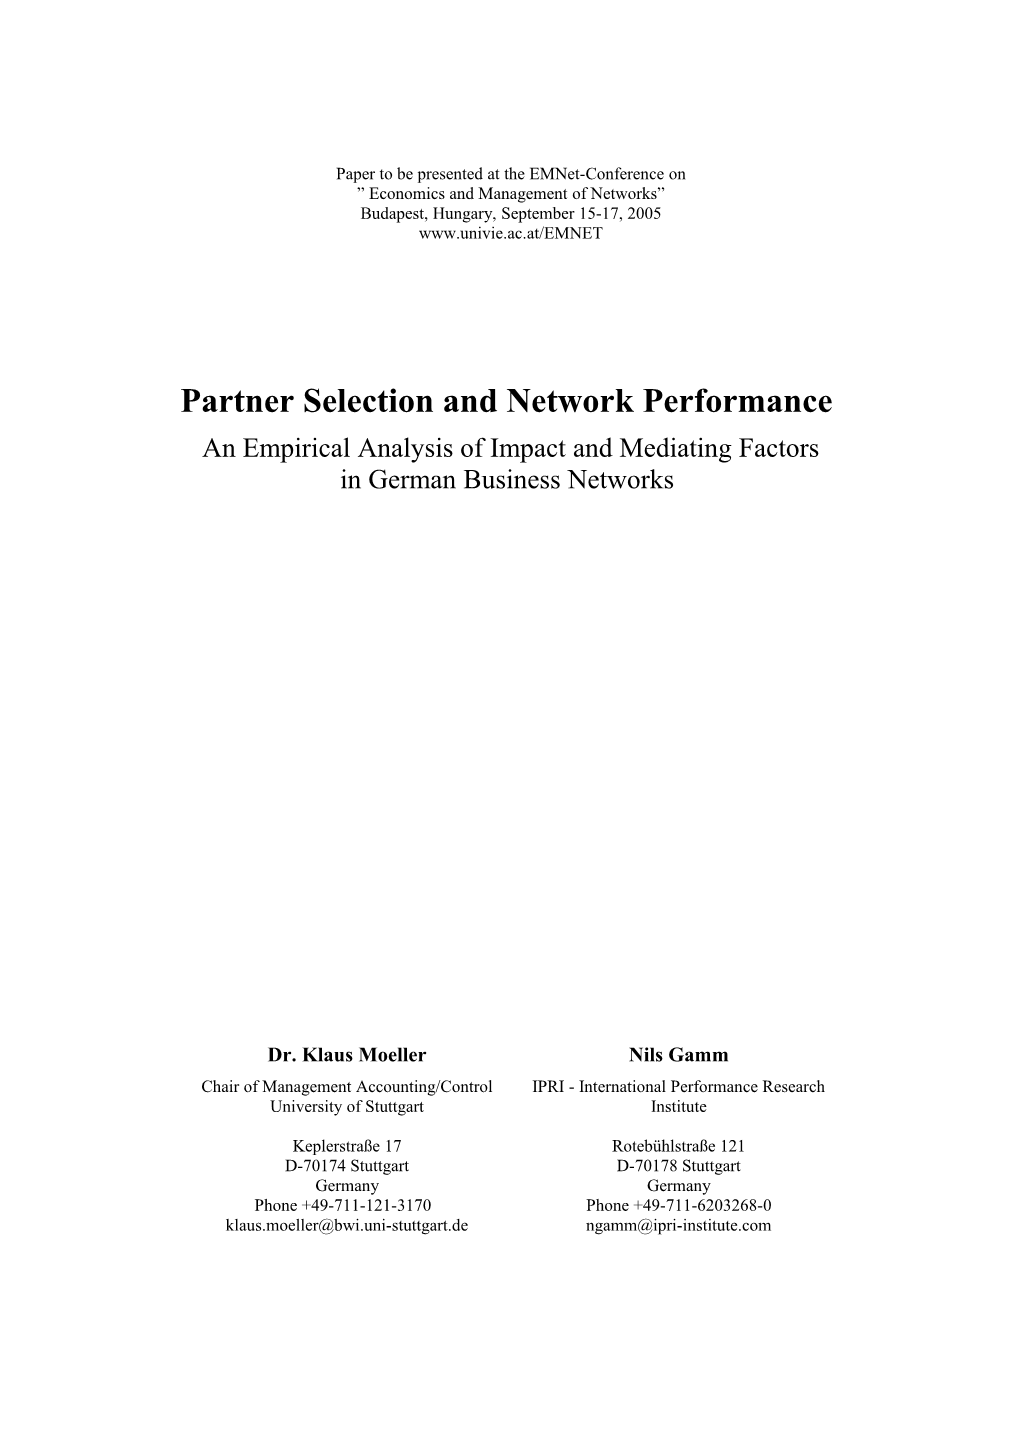 Partner Selection and Network Performance - an Empirical Analysis of Impact and Mediating